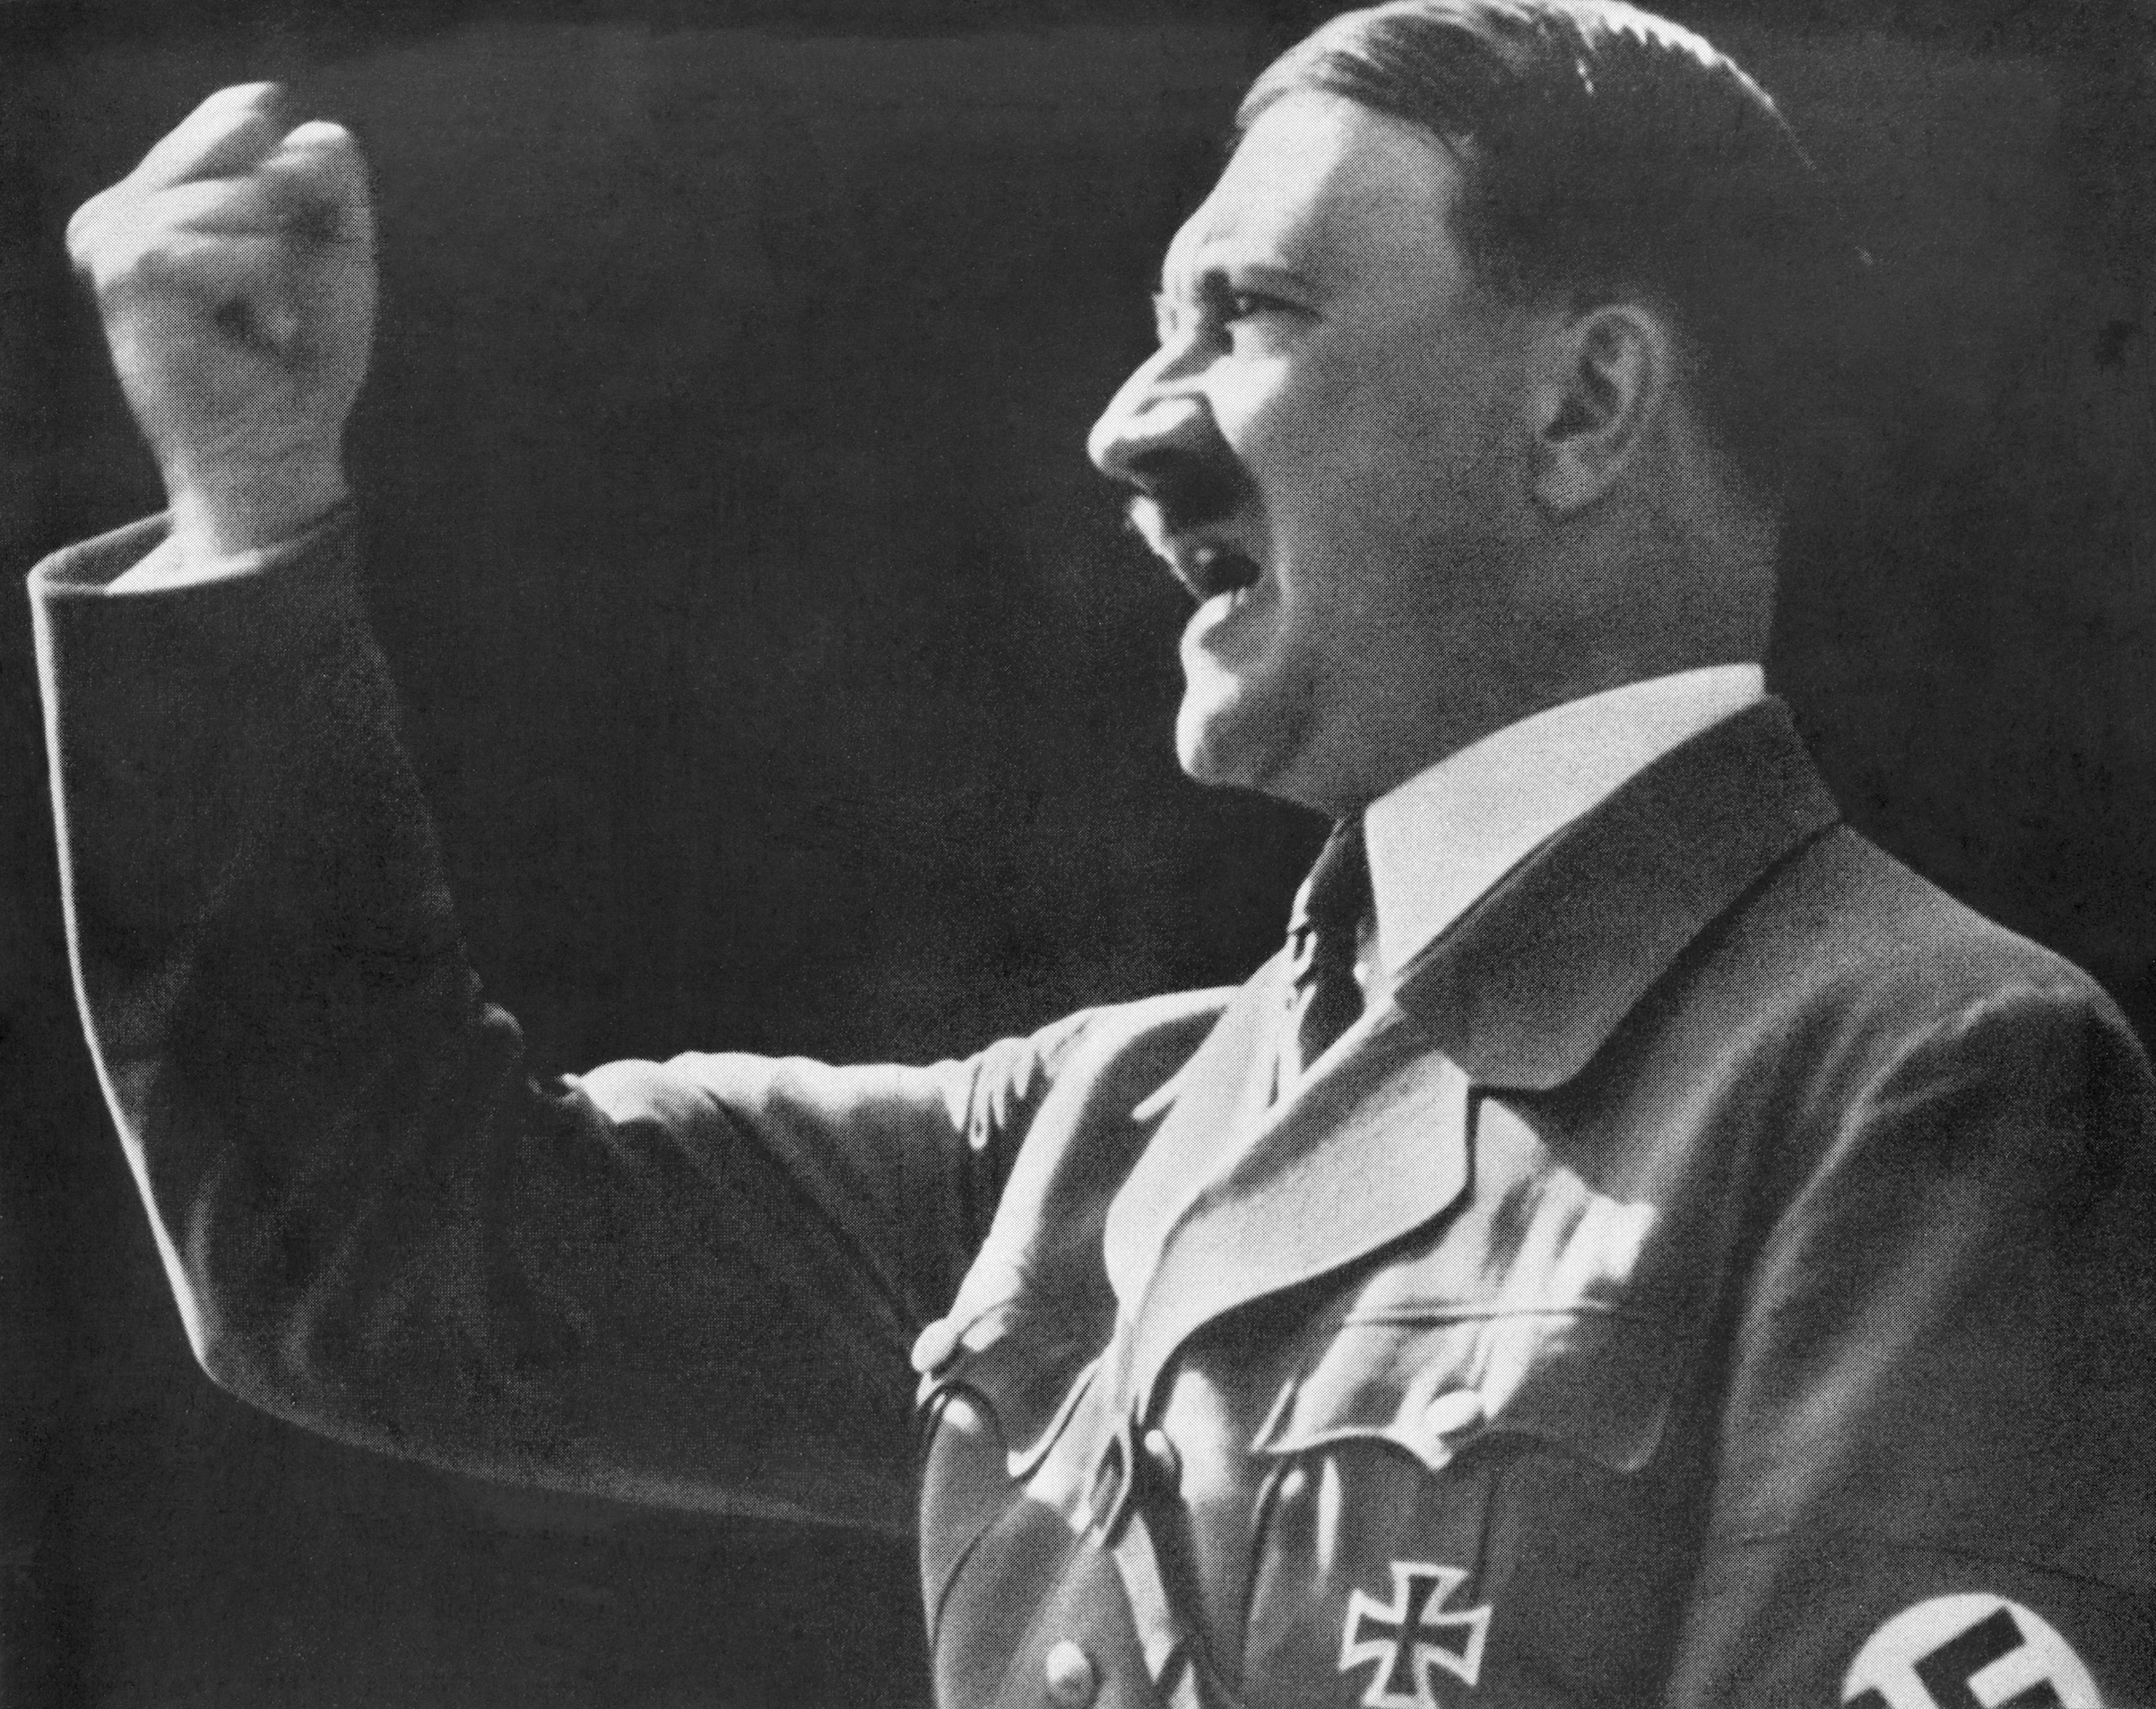 Adolf Hitler raises a defiant, clenched fist during a speech. (Bettmann/Getty Images)